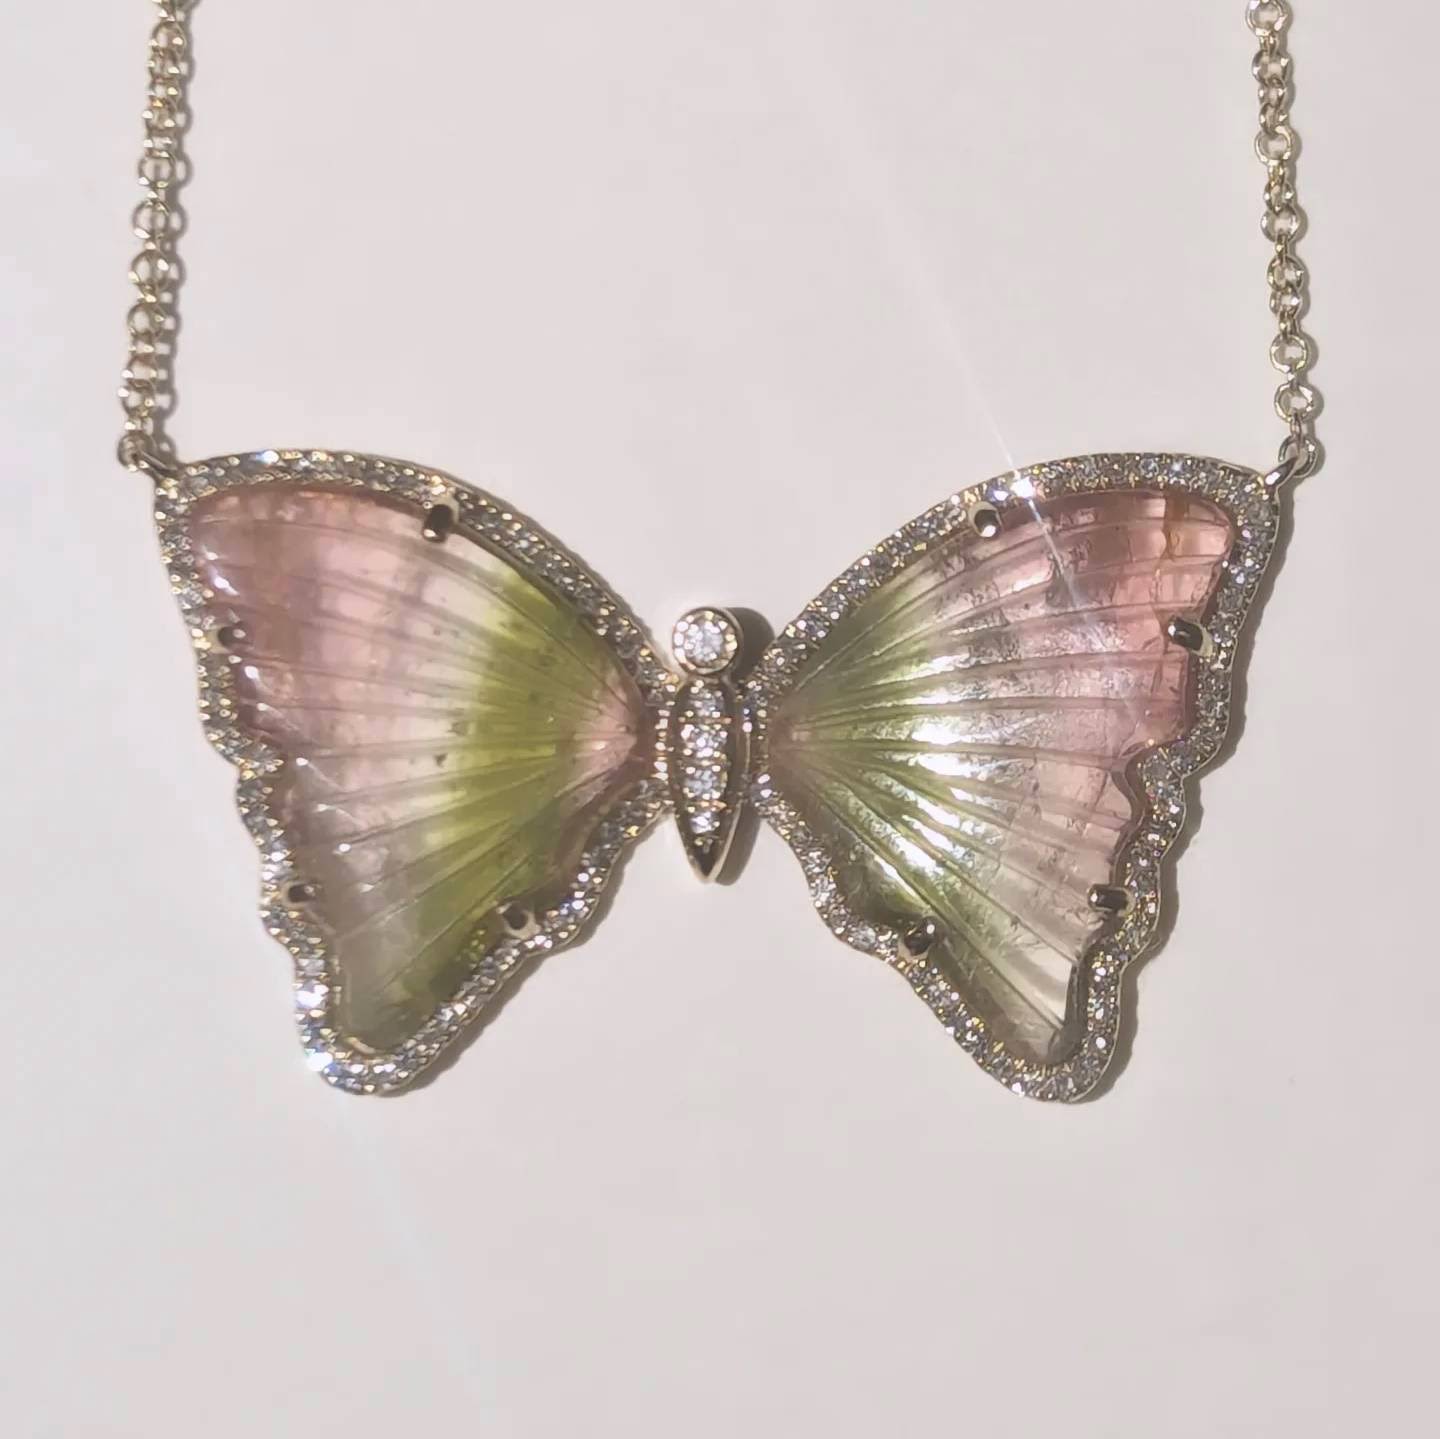 Watermelon Pink White and Green Tourmaline Butterfly Necklace with Diamonds